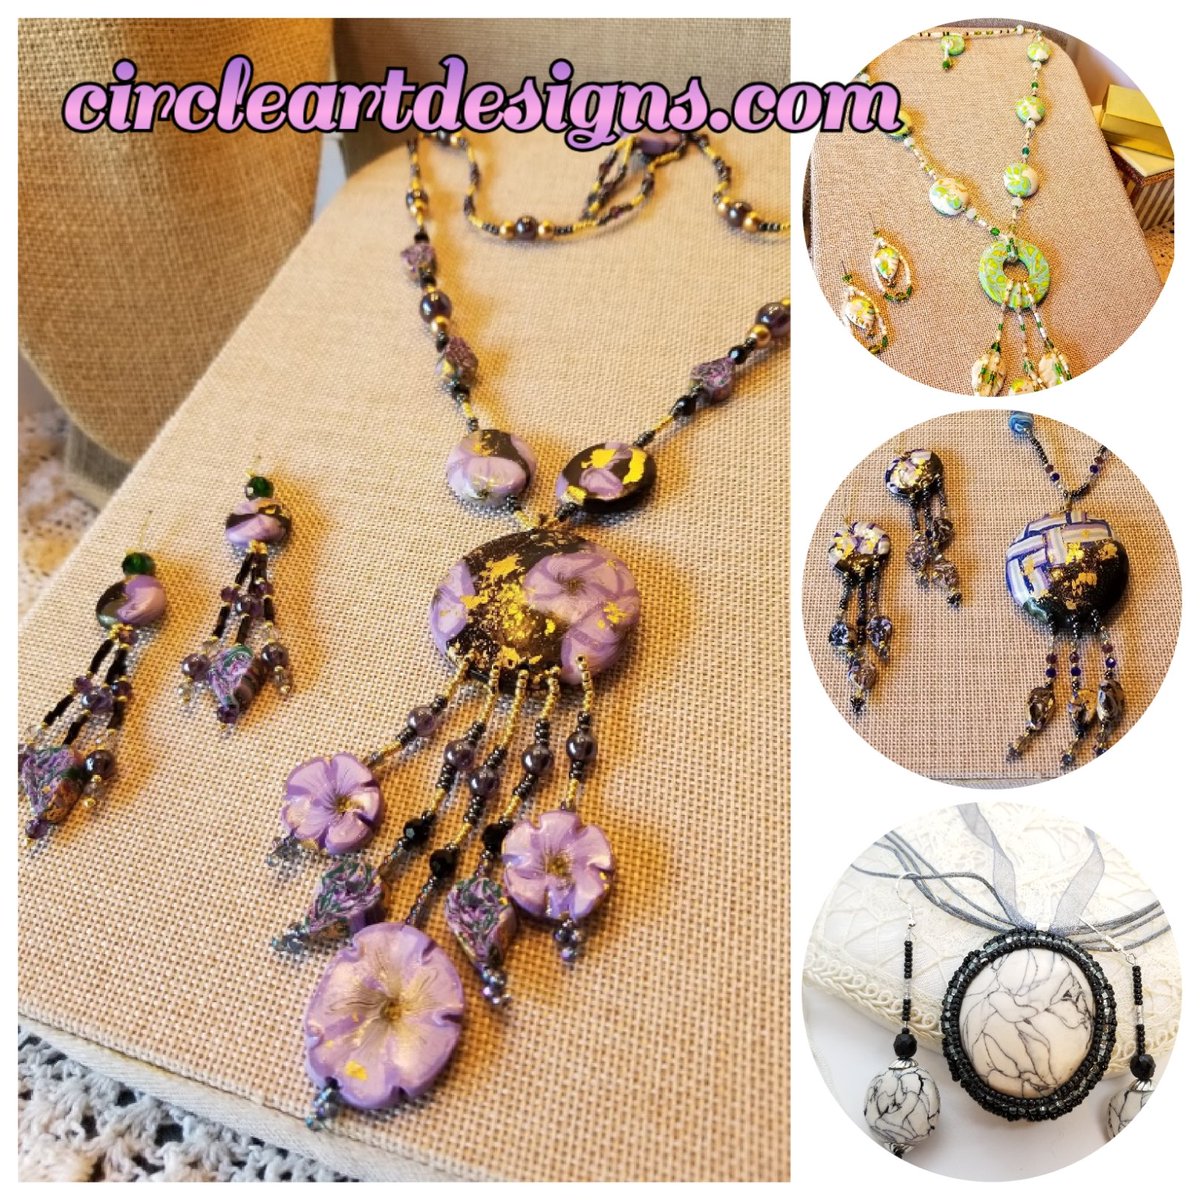 From our 'Something Old, Something New Collection ' shop now at  circleartdesigns.com 
#handmadejewelry #cottagecore #handmade #vintagelook #vintagestyle #bohemianstyle #beadedjewelry #vintagestylejewelry #circleartdesigns